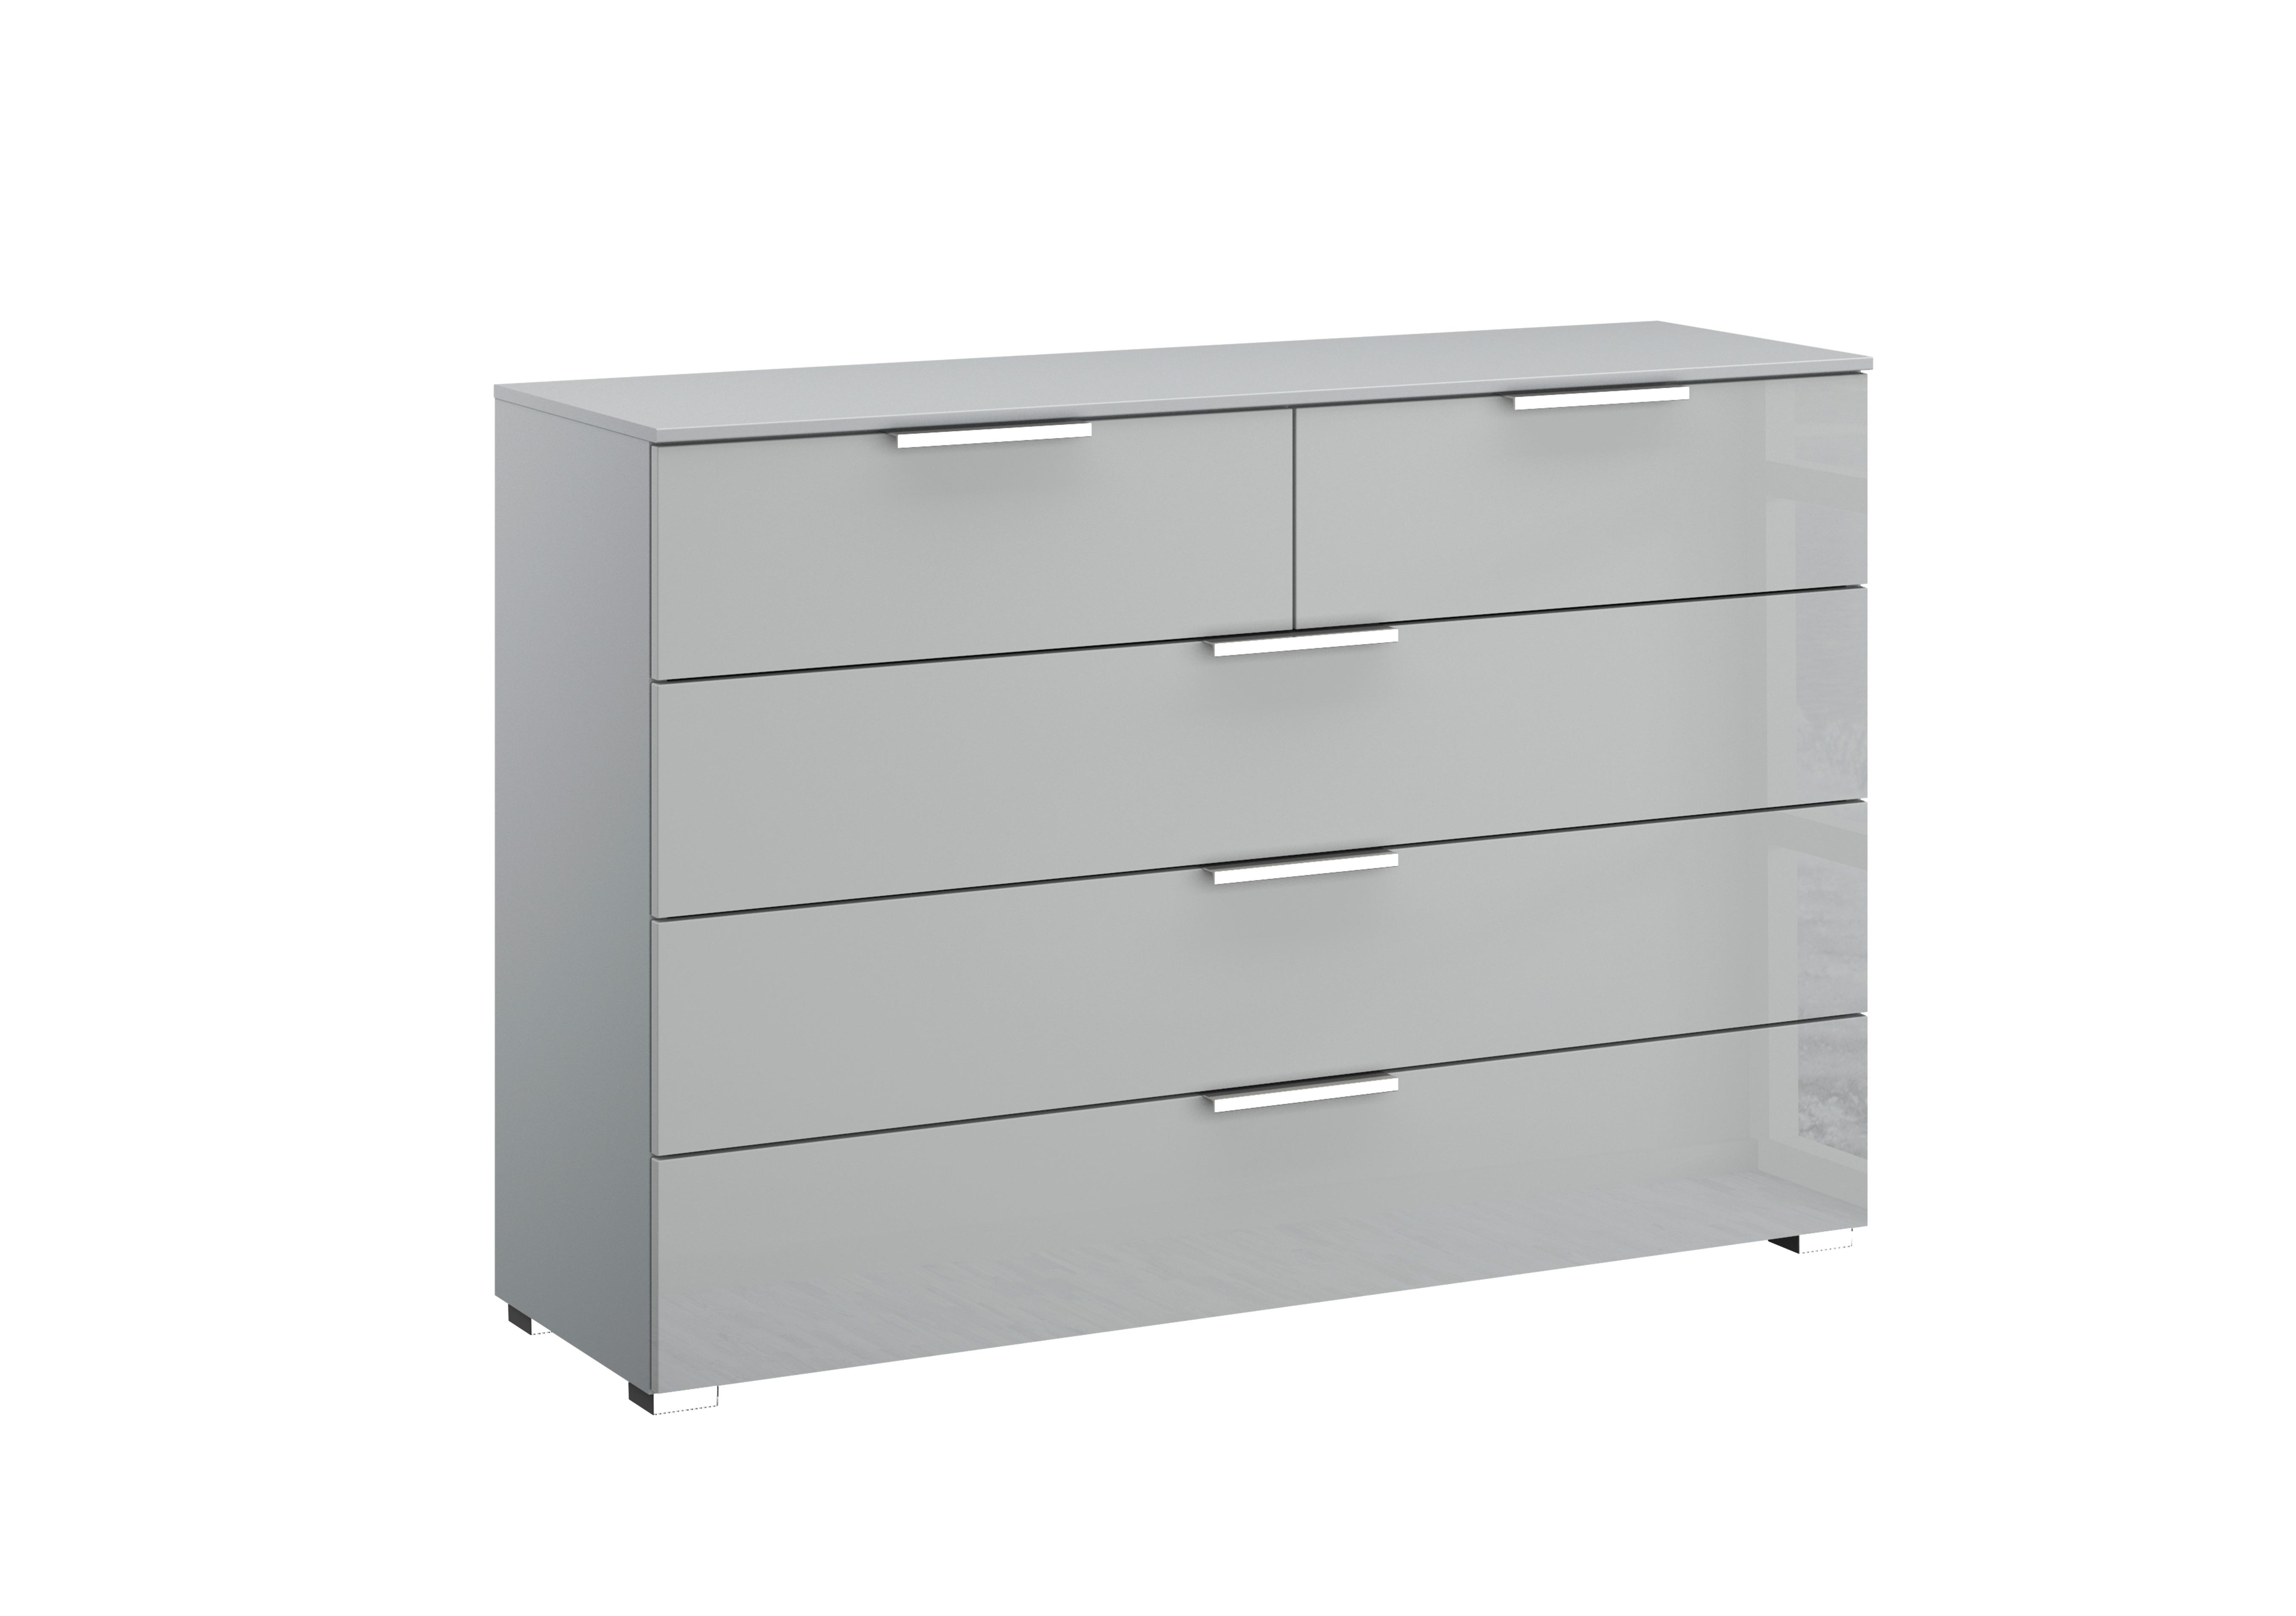 Perth 5 Drawer Chest in Z2603 Silk Grey Carc And Glass on Furniture Village